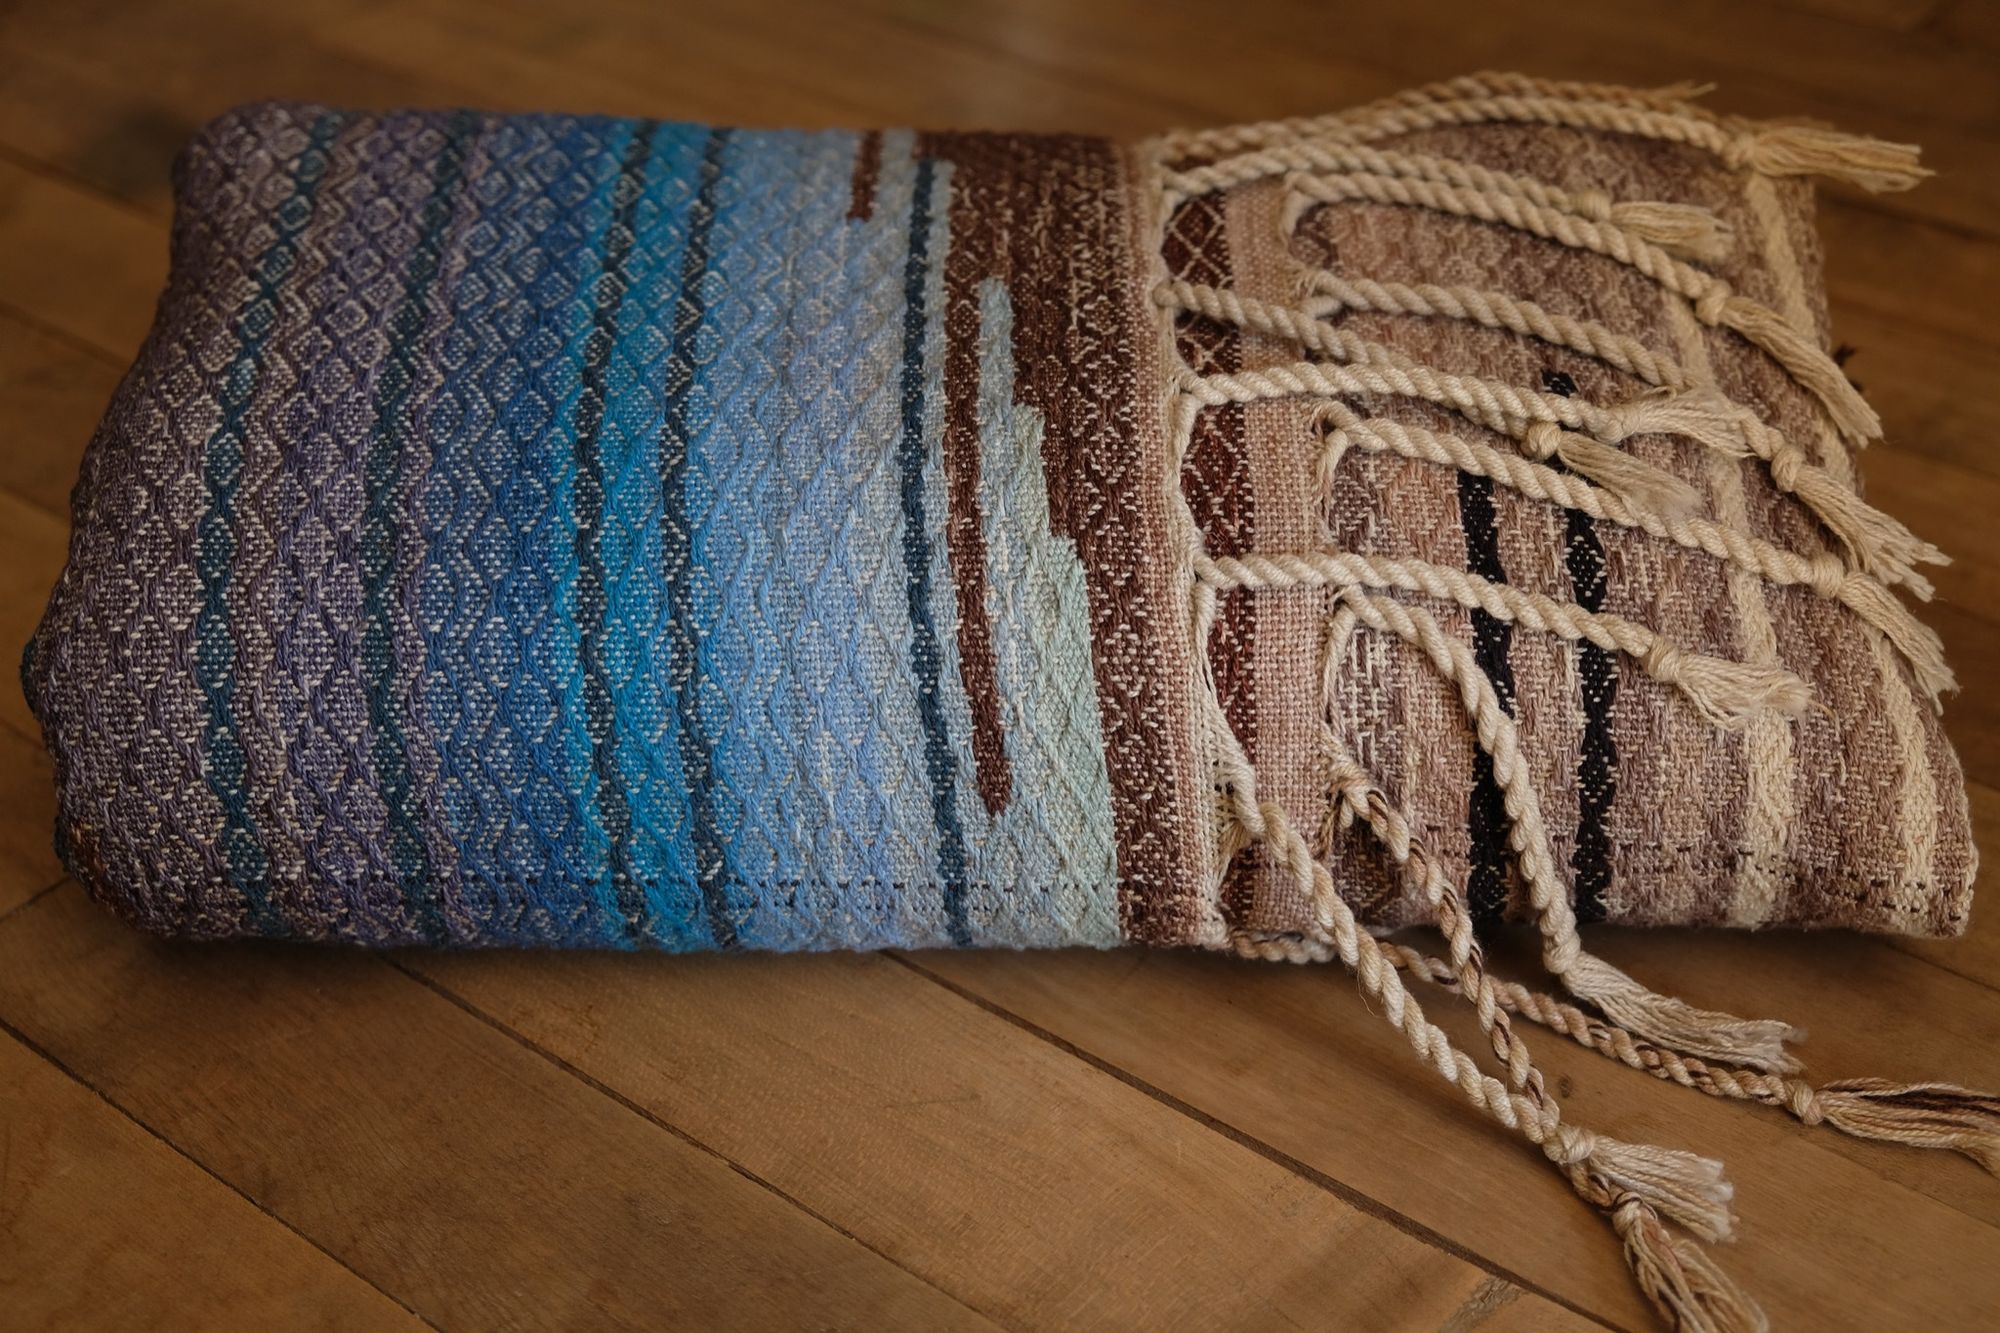 Multi colored handwoven raw silk fabric, folded and laying on a wooden floor